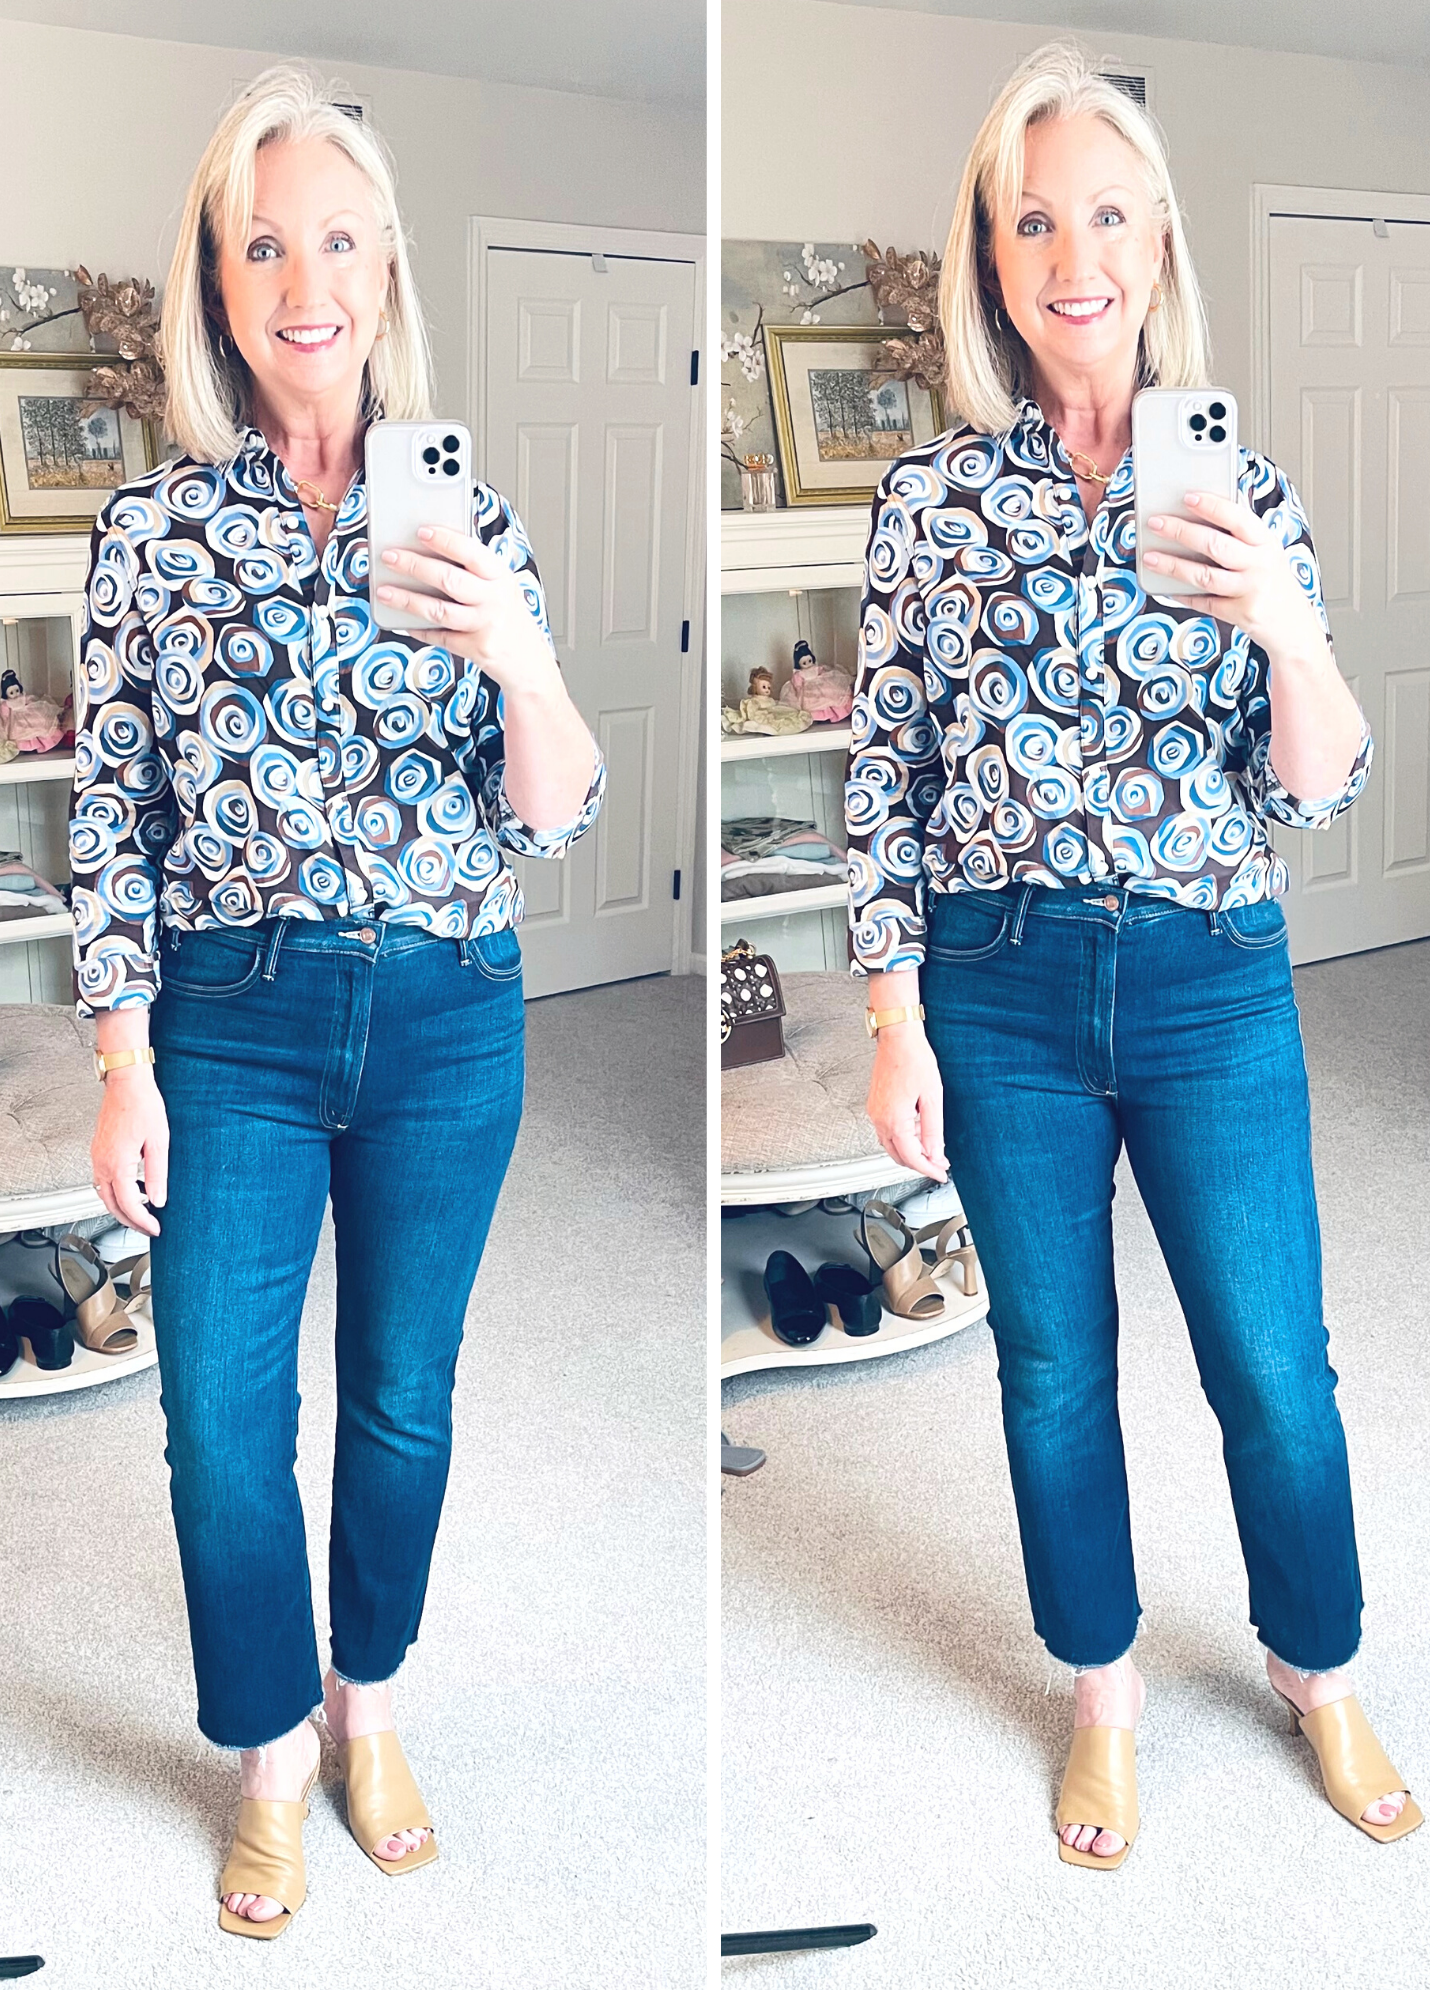 Jeans and a Print Shirt